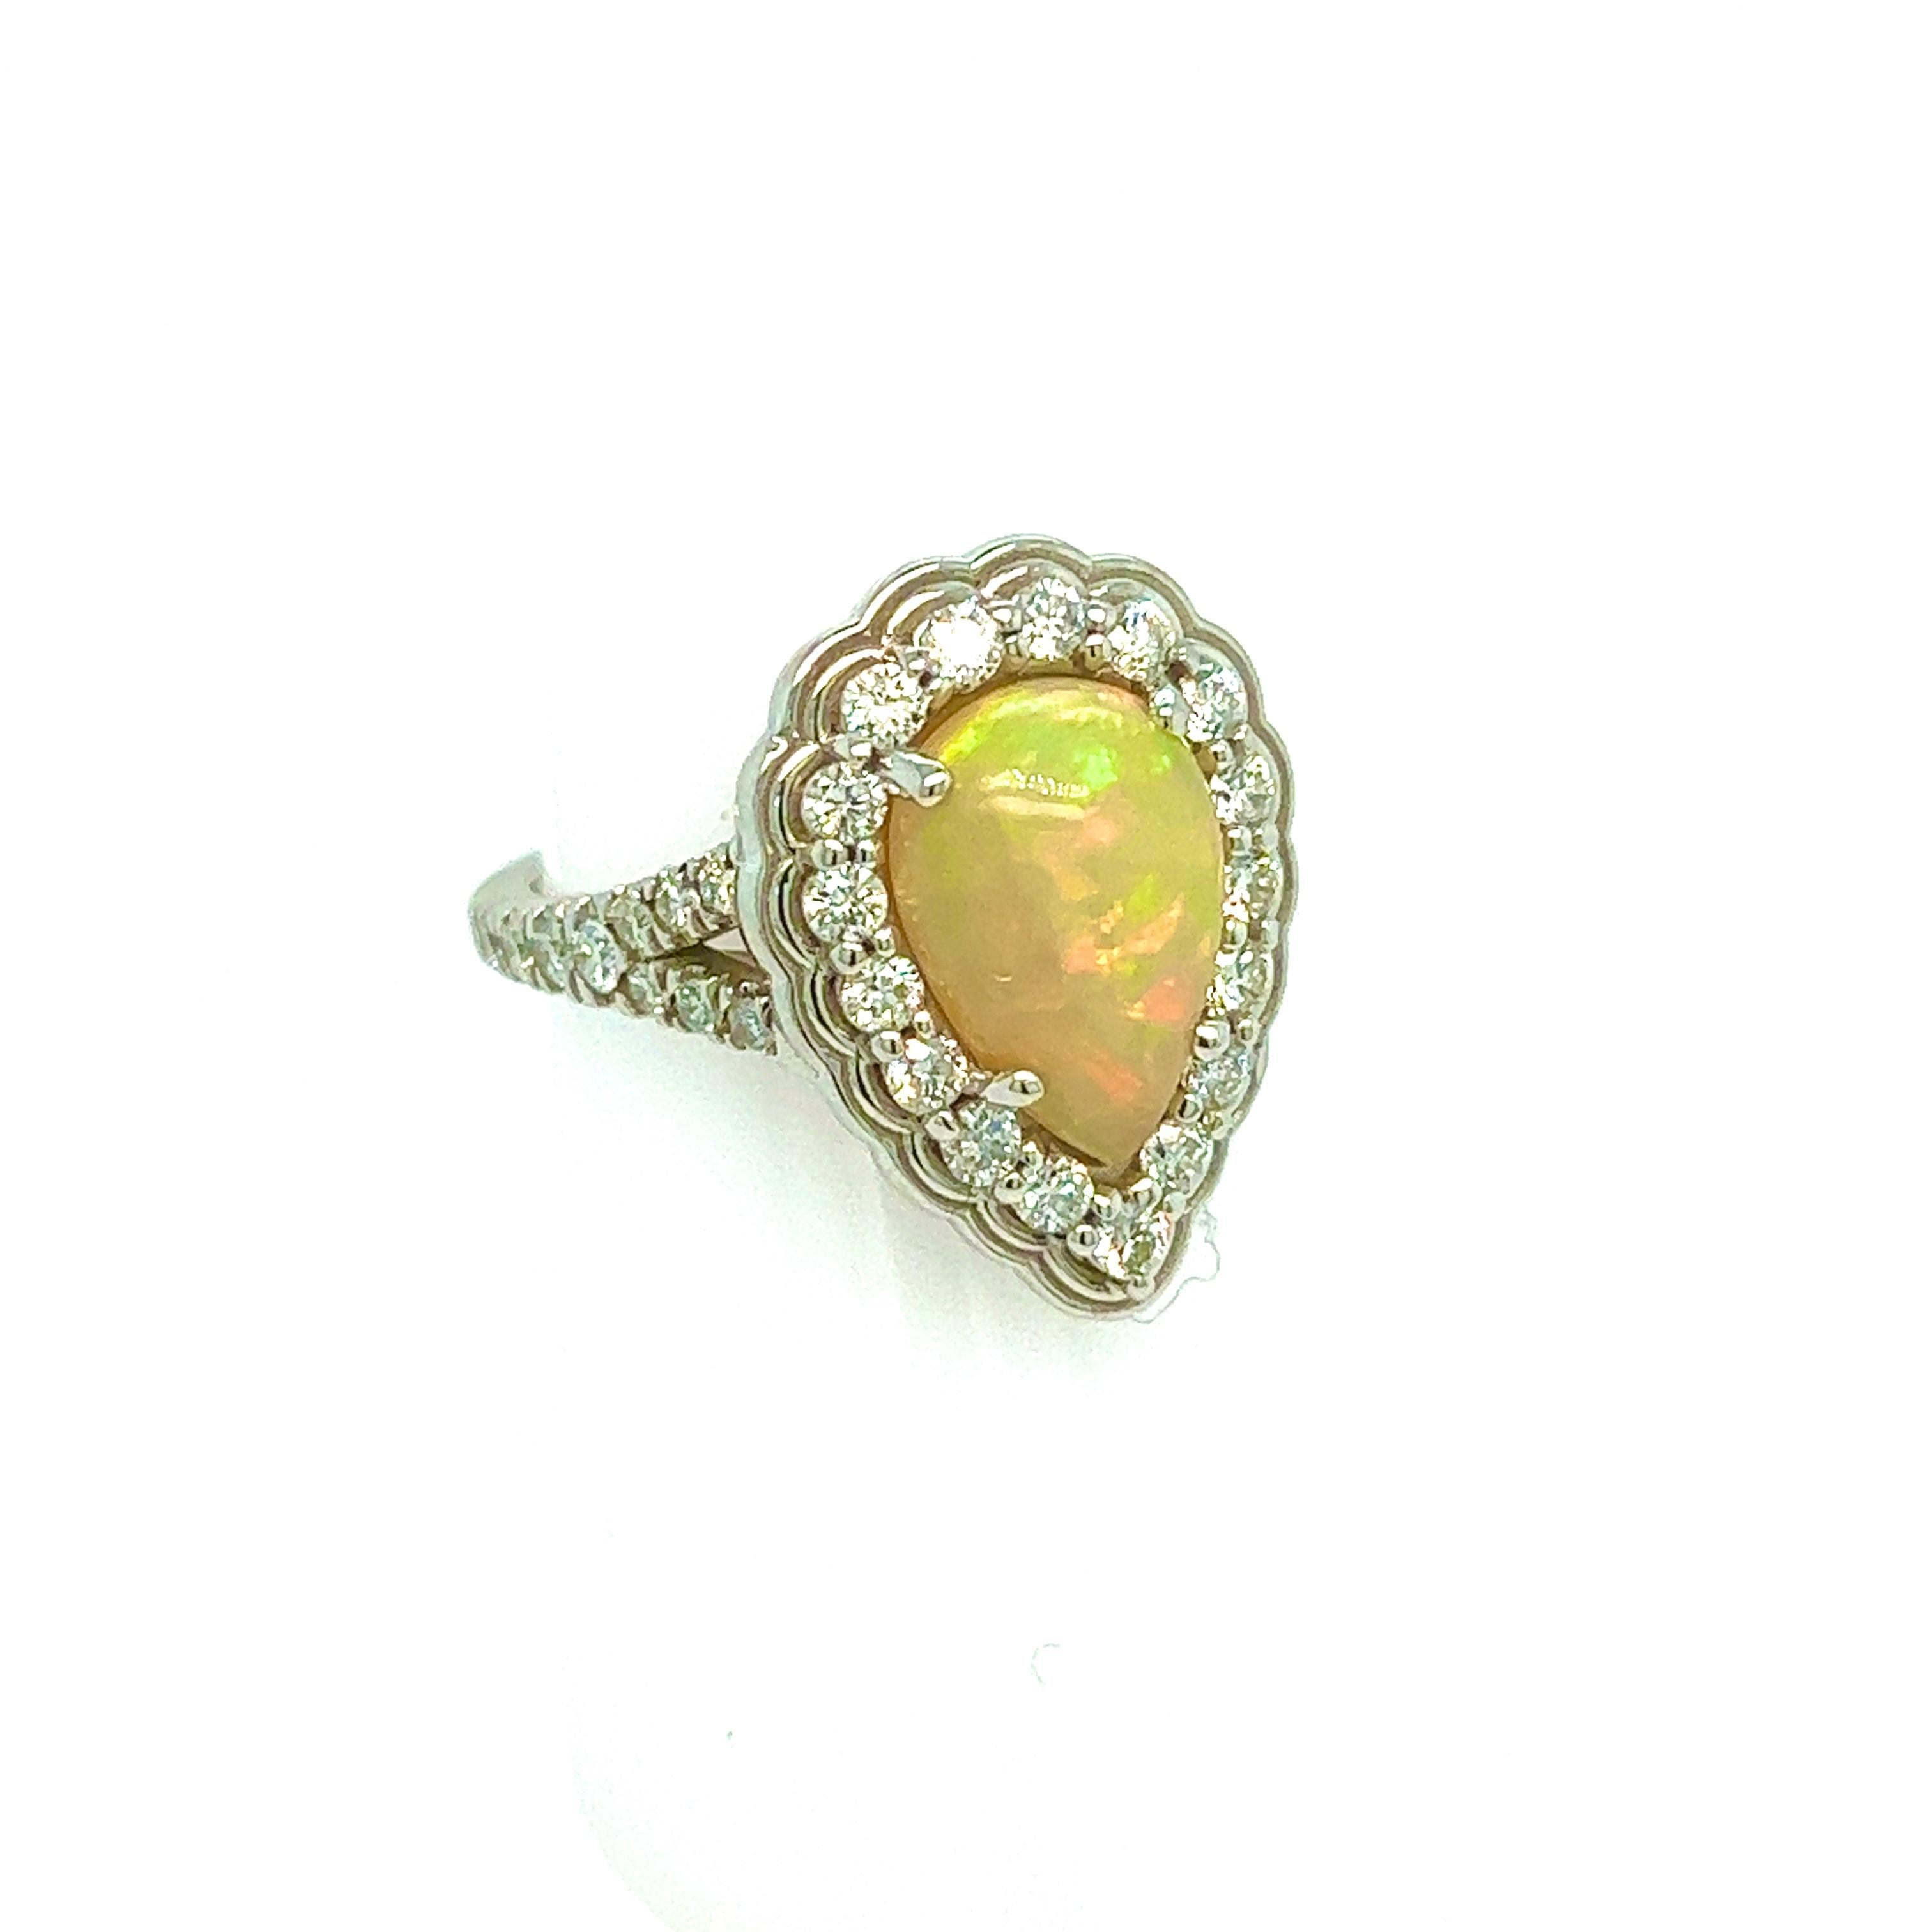 Natural Opal Diamond Ring 6.25 14k W Gold 2.35 TCW Certified For Sale 3